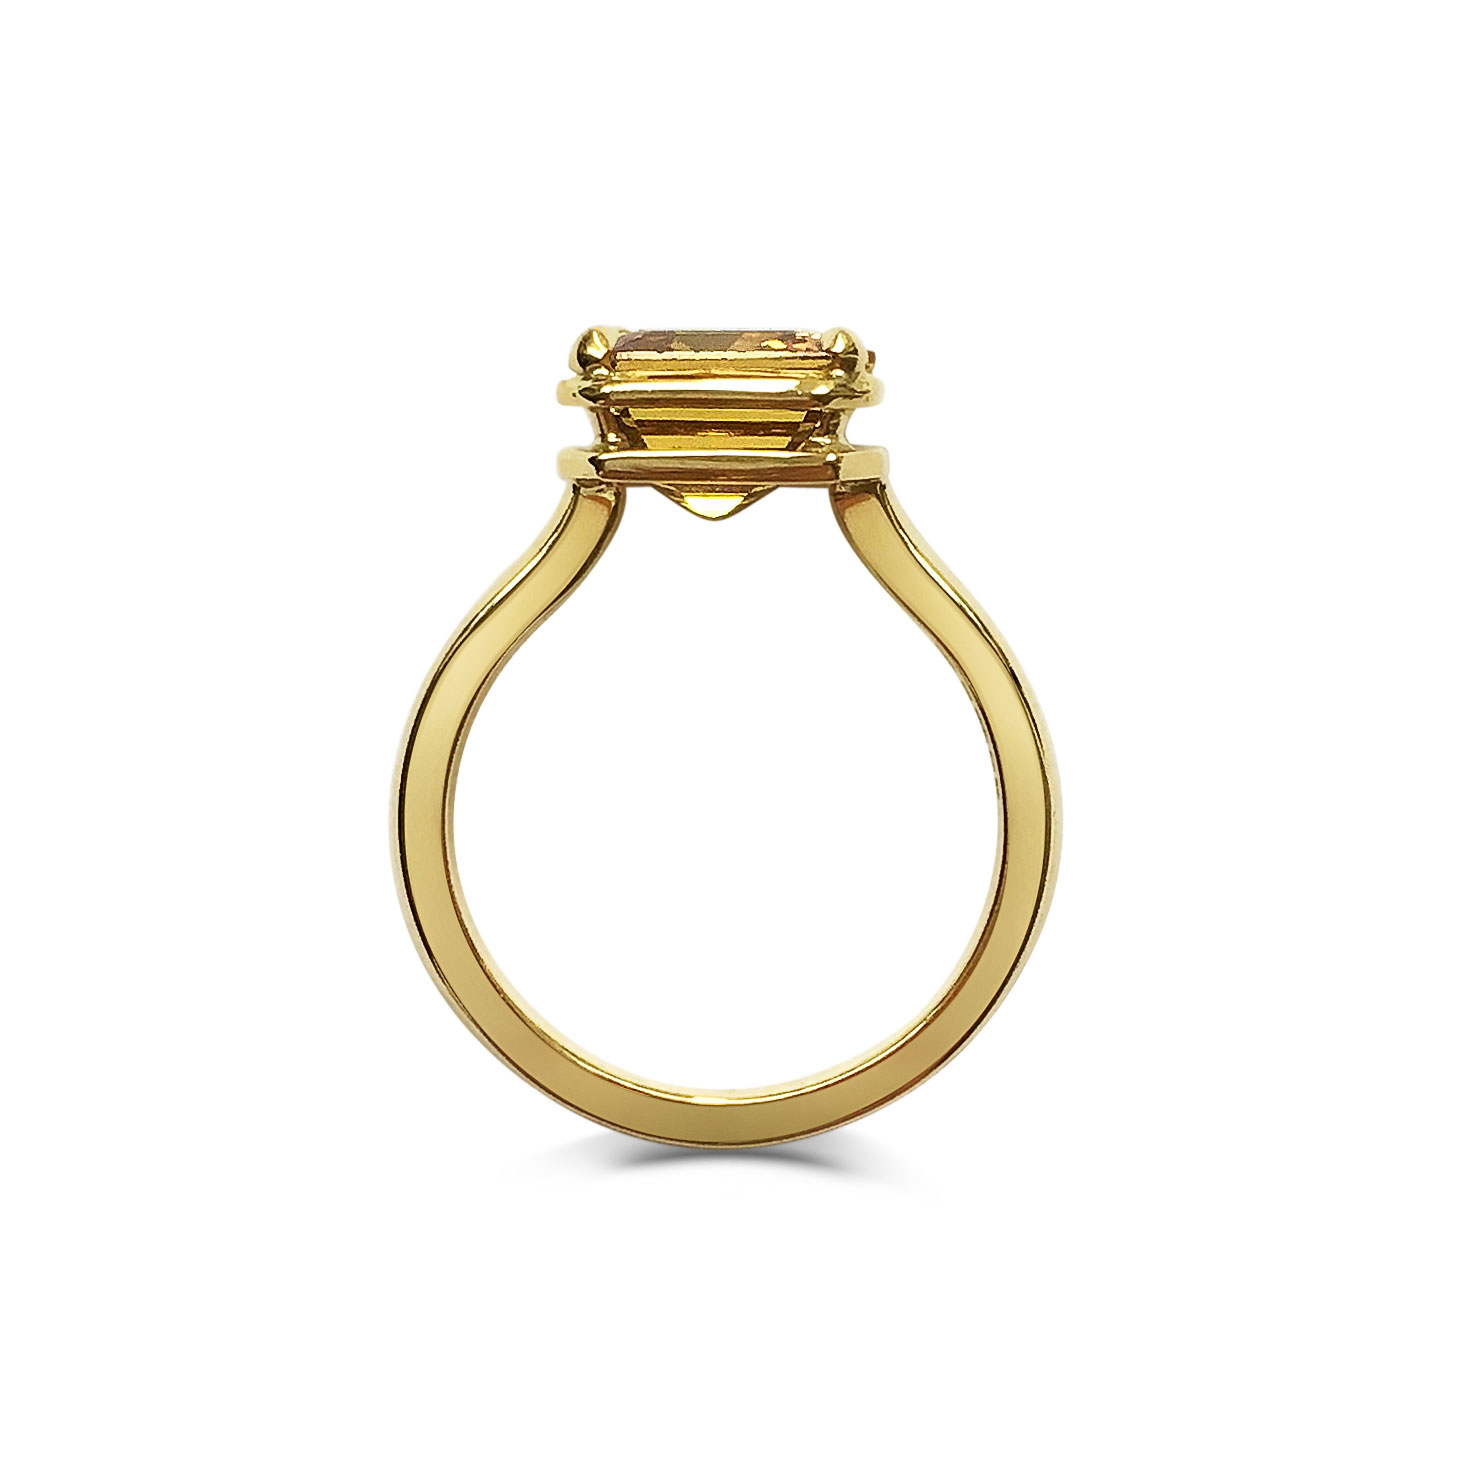 Square-cut yellow sapphire ring mounted in 18ct yellow gold